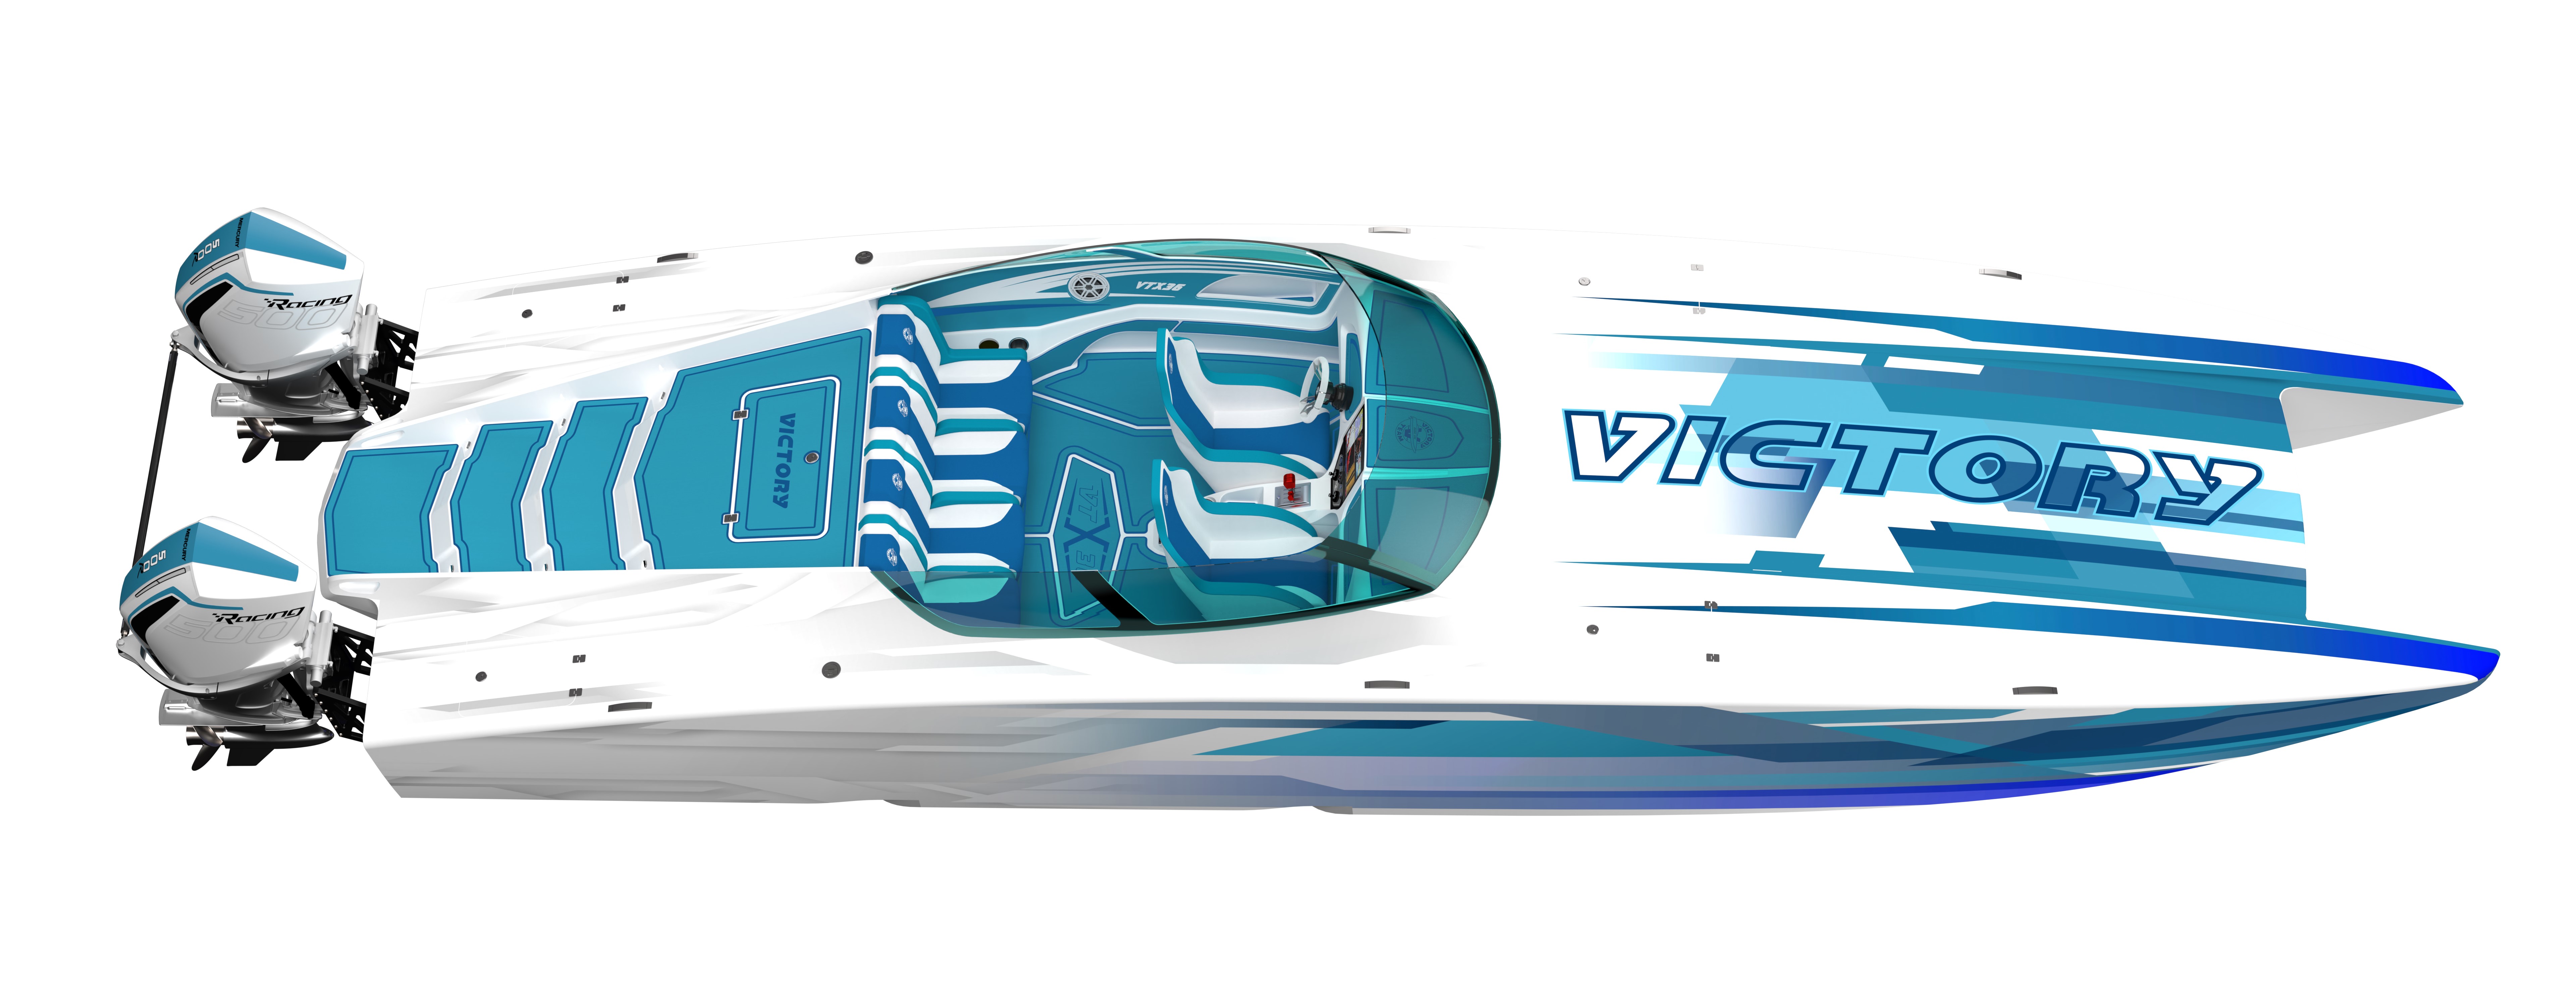 Victory launches the two boats (VT51) and (VTX36)